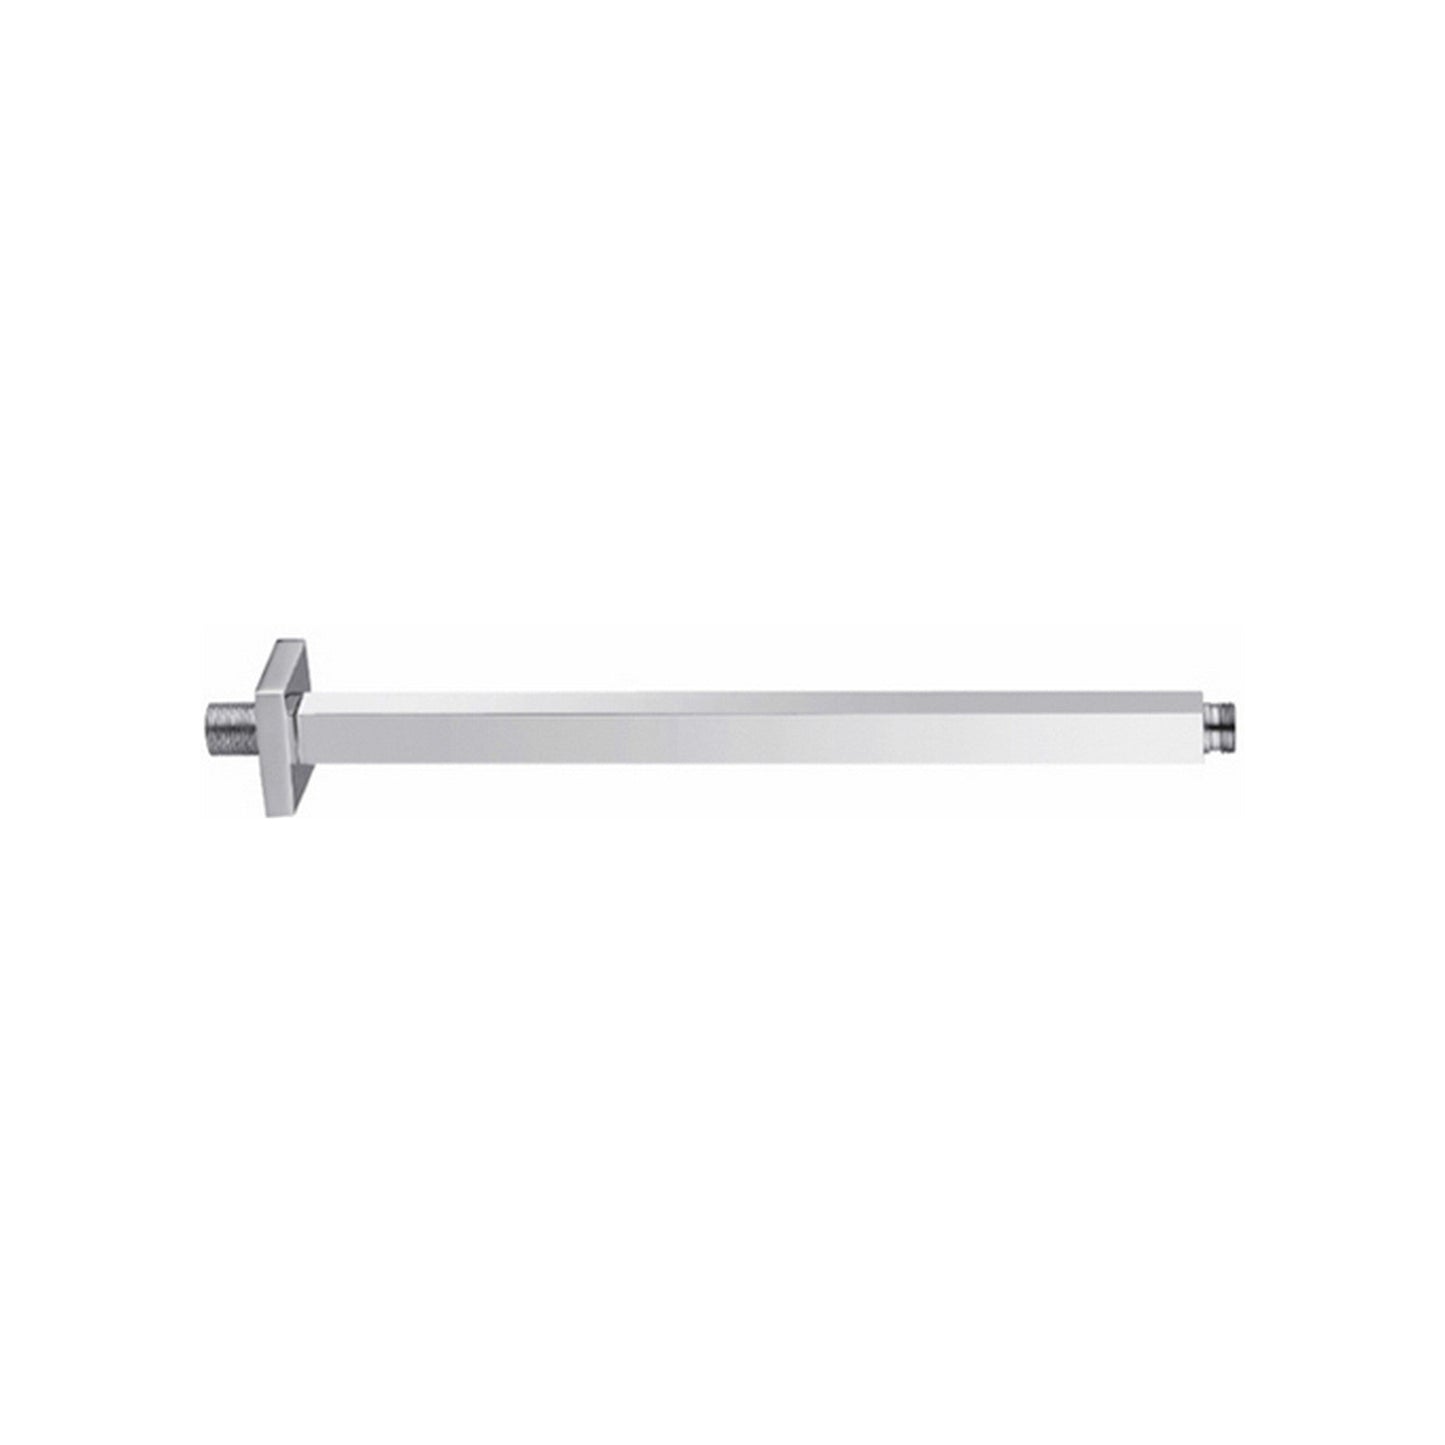 Ratel 14" Square Chrome Ceiling-Mounted Shower Arm